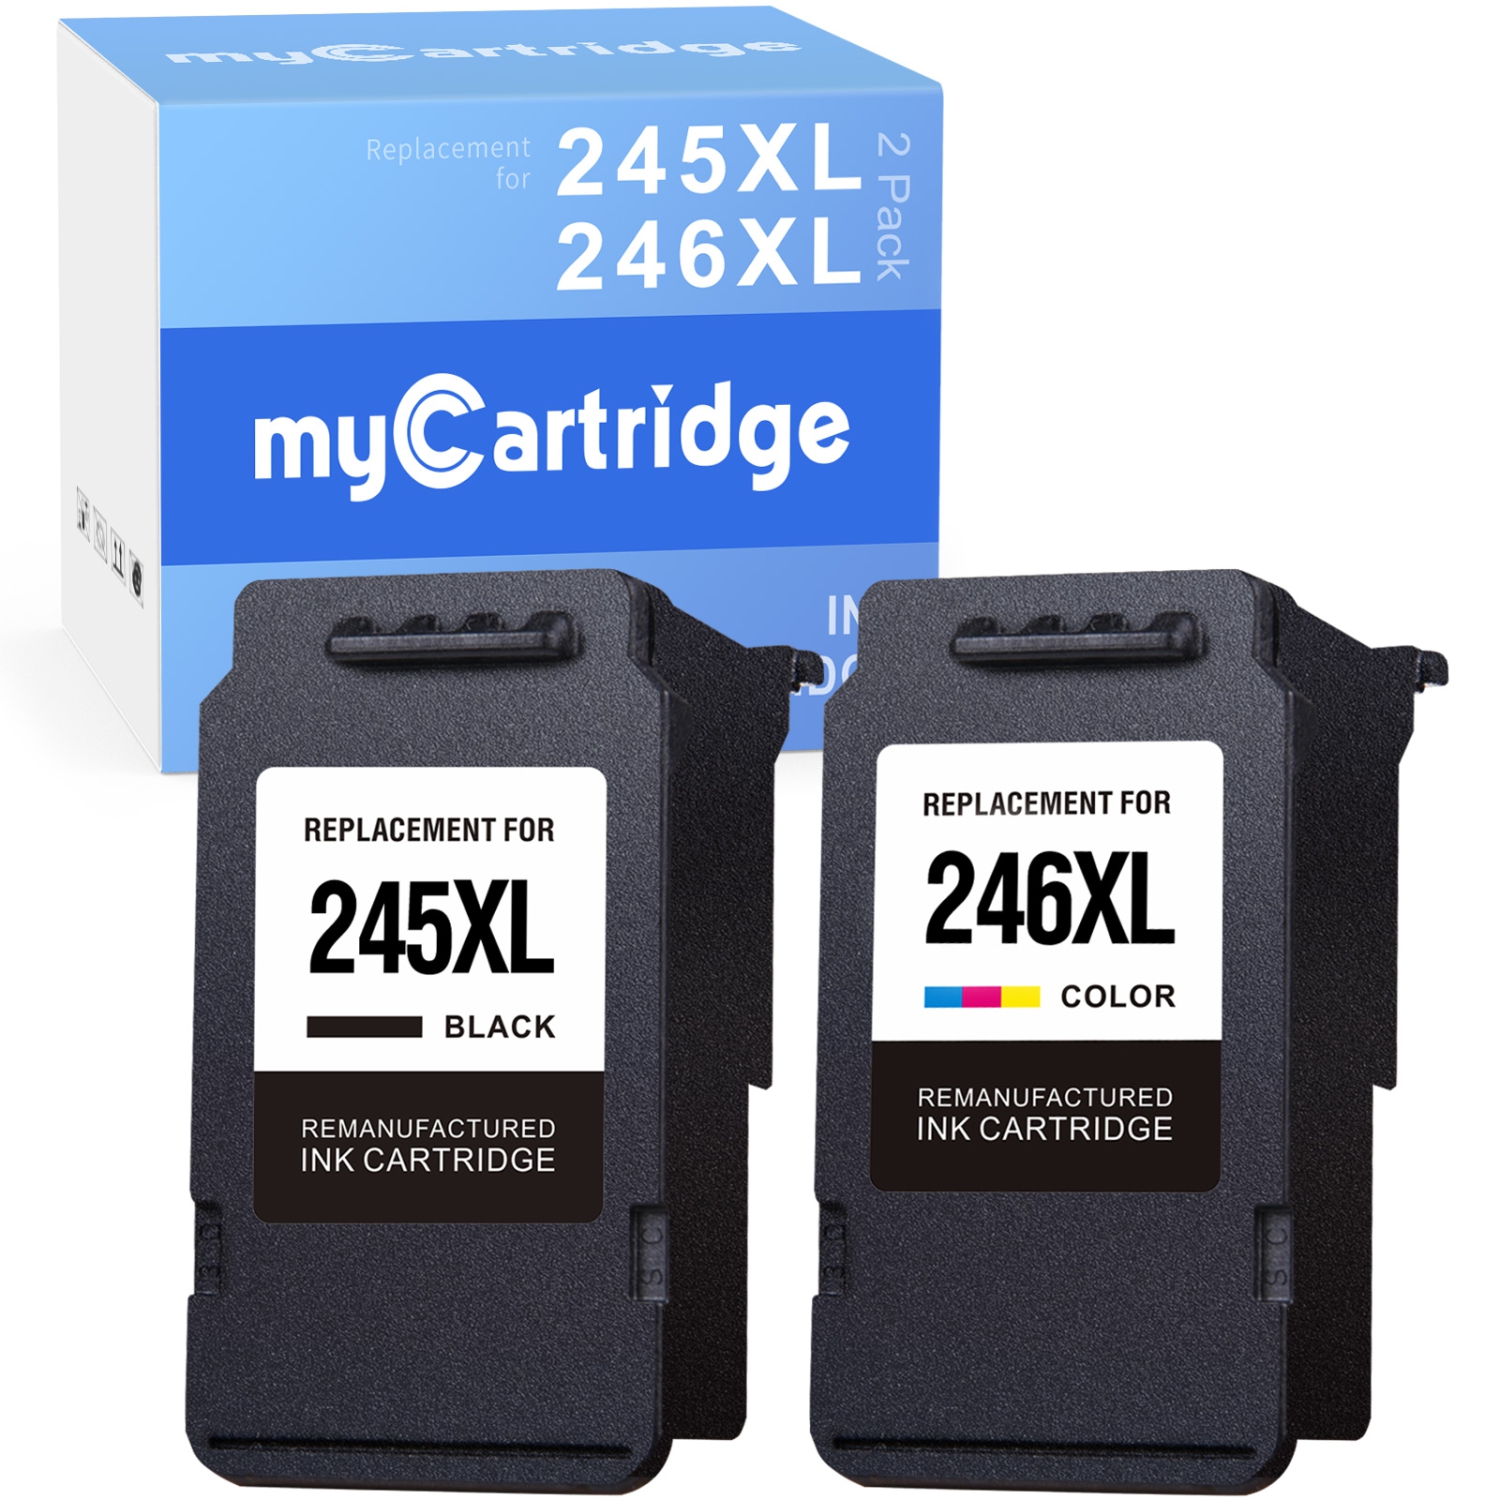 Canon PG-245 XL | MYCARTRIDGE Remanufactured High Capacity Black Ink Cartridge + Canon CL-246 Color Ink Cartridge